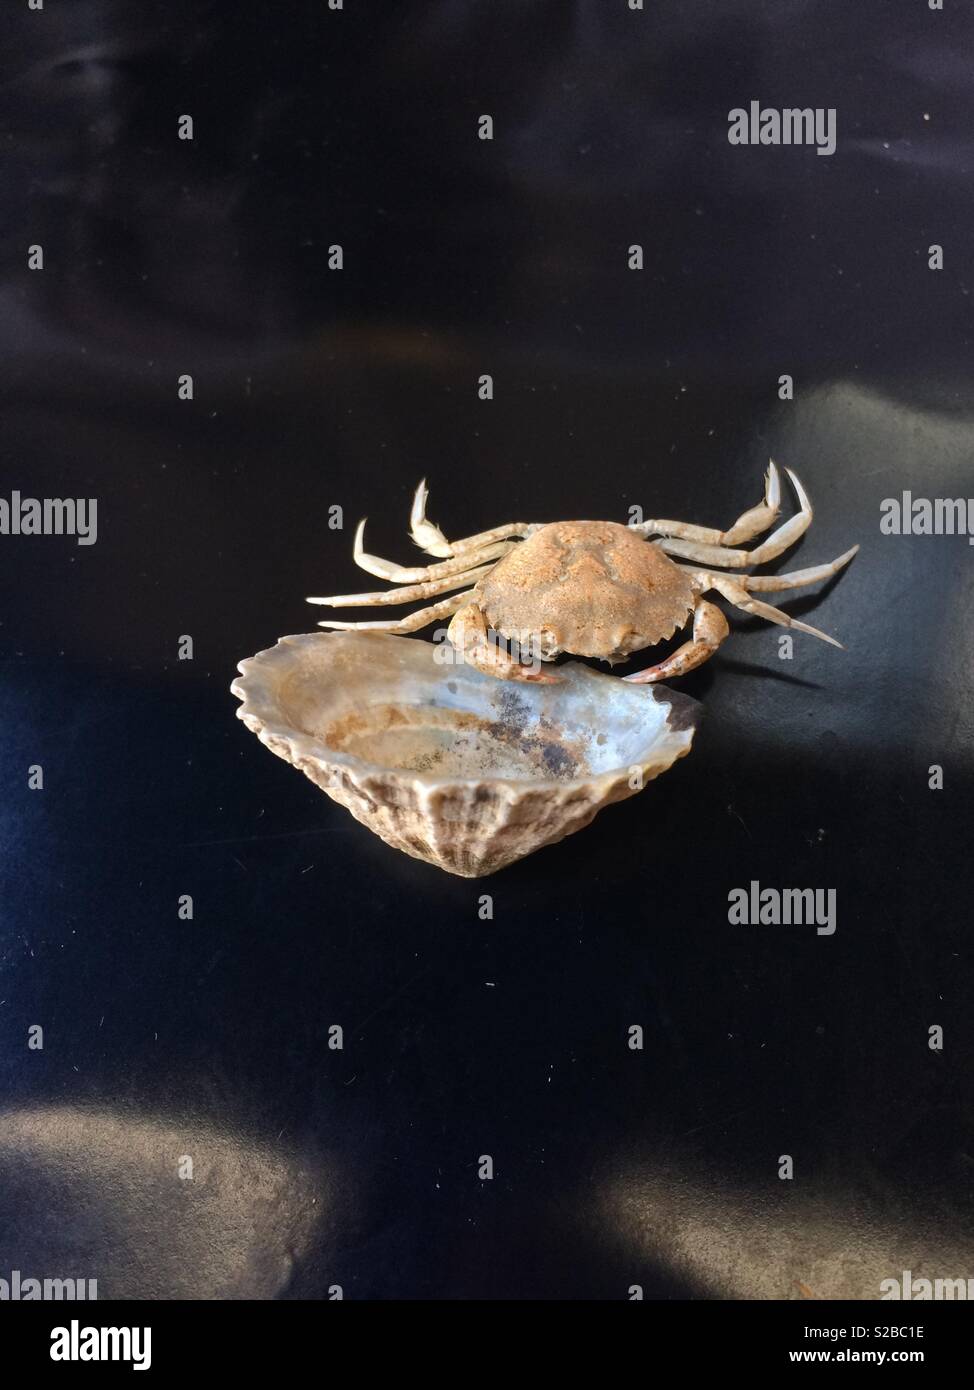 Dead crab with shell Stock Photo